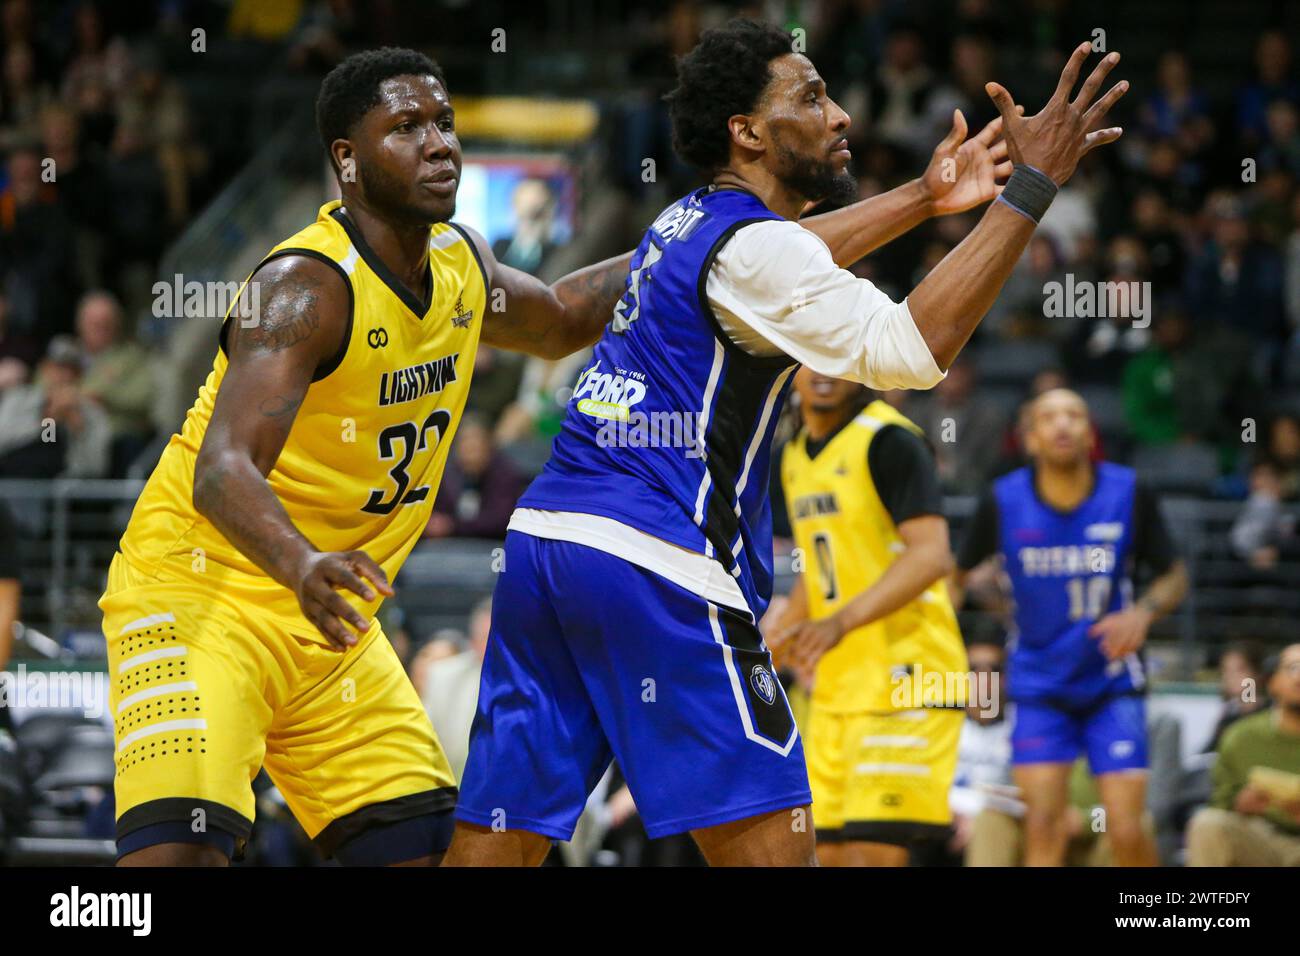 London, Canada. 17th Mar, 2024. London Ontario Canada. March 17 2024, The London Lightning defeat the Kitchener Titans 118-114 in regulation on St. Patrick's Day. Drew Gordon (32) of London Lightning guarding Jaquan Lightfoot (5) of Kitchener Titans. Credit: Luke Durda/Alamy Live News Stock Photo